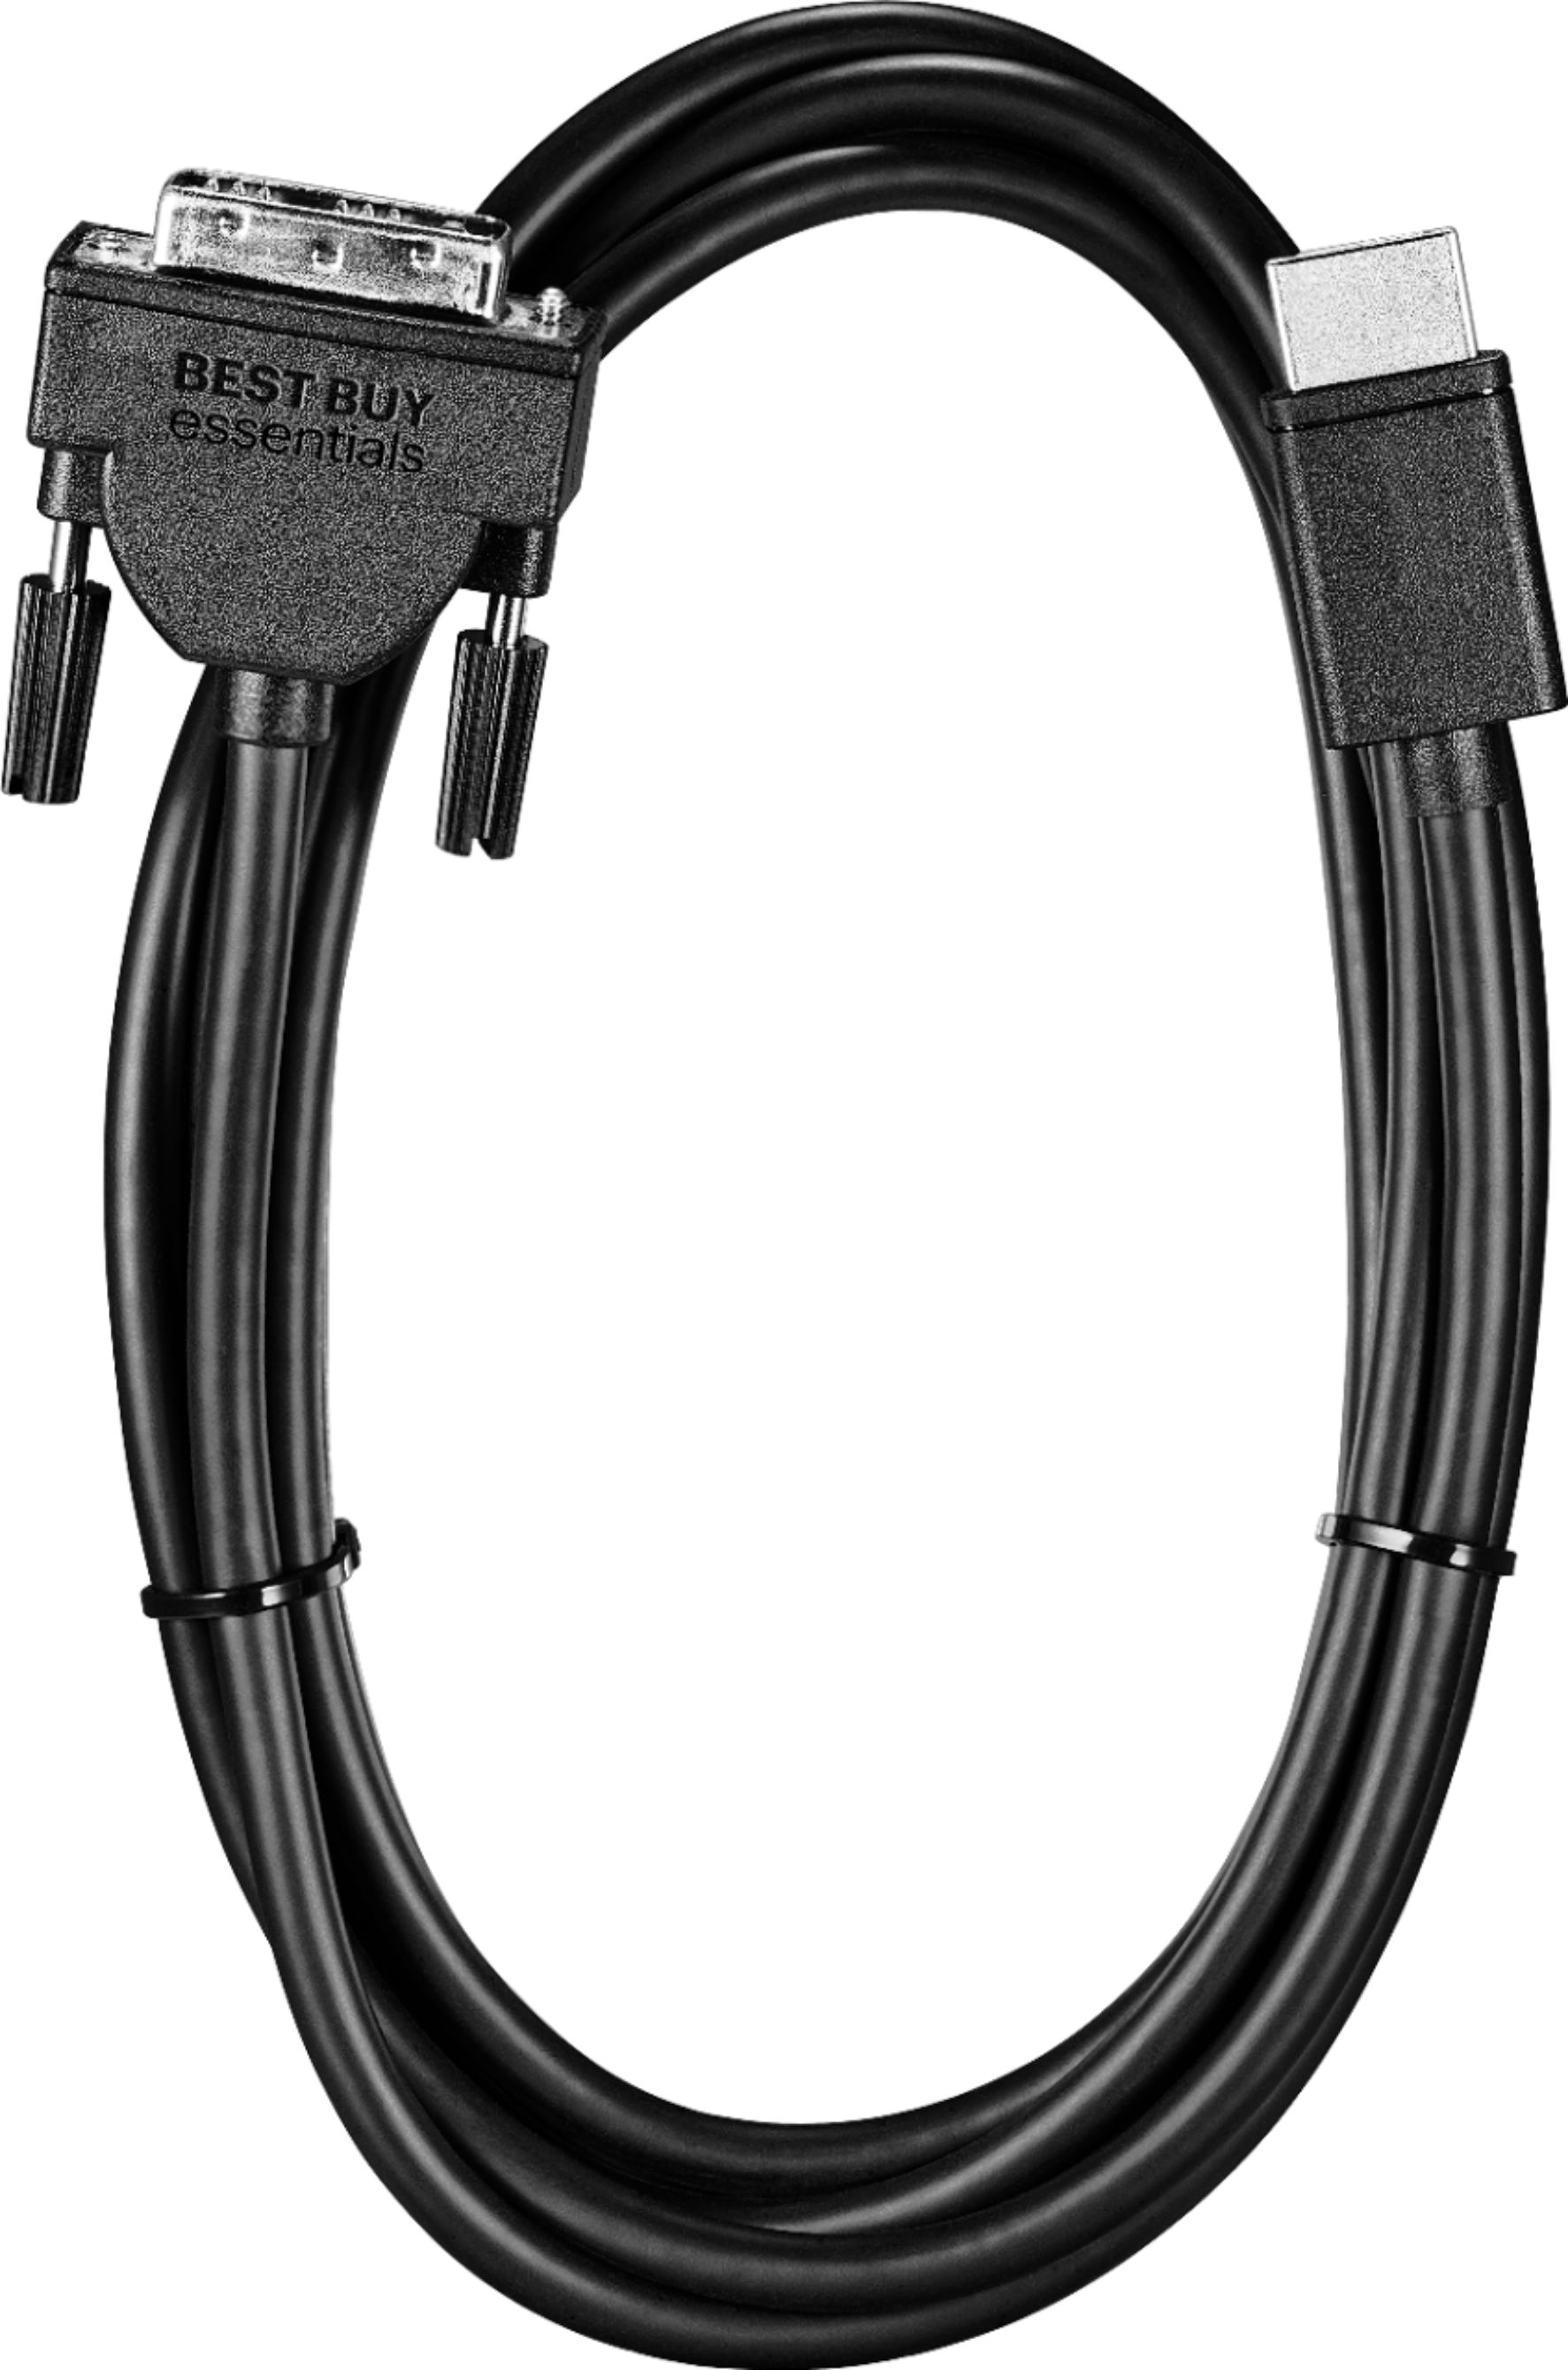 Best Buy: Best Buy essentials™ 6' DVI-D-to-HDMI Cable Black BE-PCHDDV6